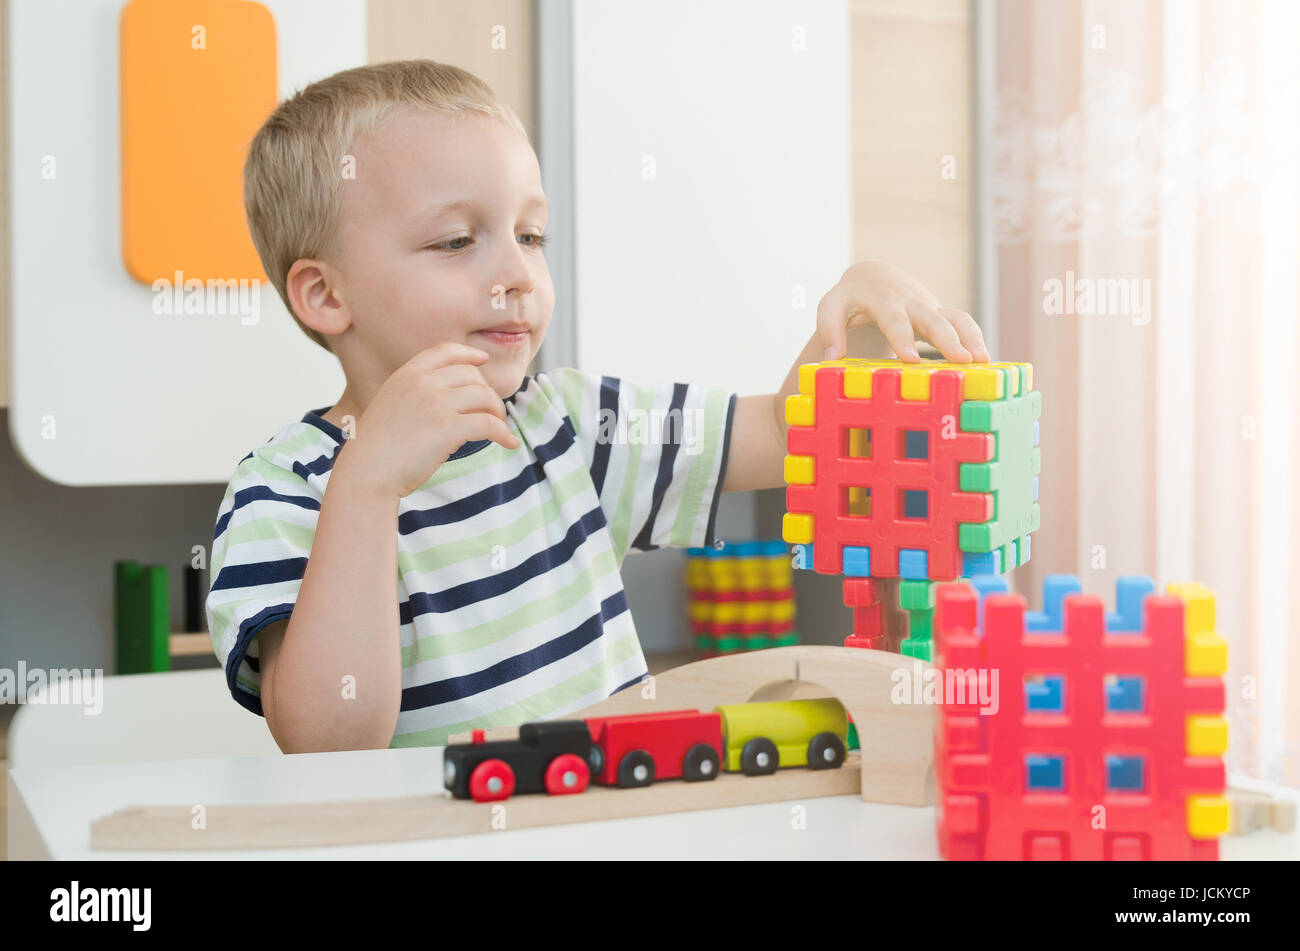 Little boy playing with blocks on a table. child kid young daycare boy playroom block build concept Stock Photo